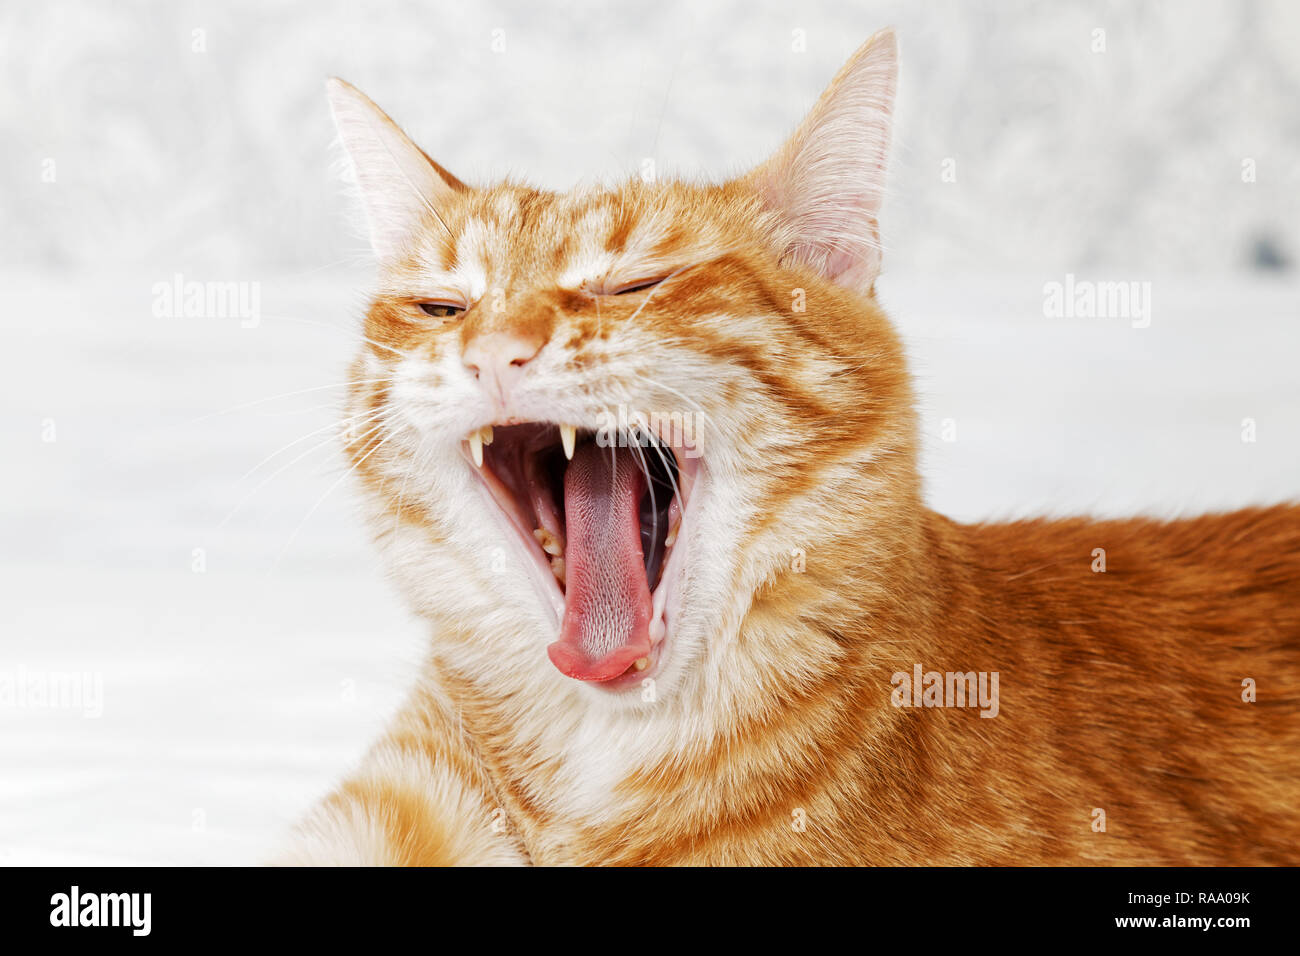 Closeup portrait of yawning ginger cat on light blurred background. Shallow focus. Stock Photo